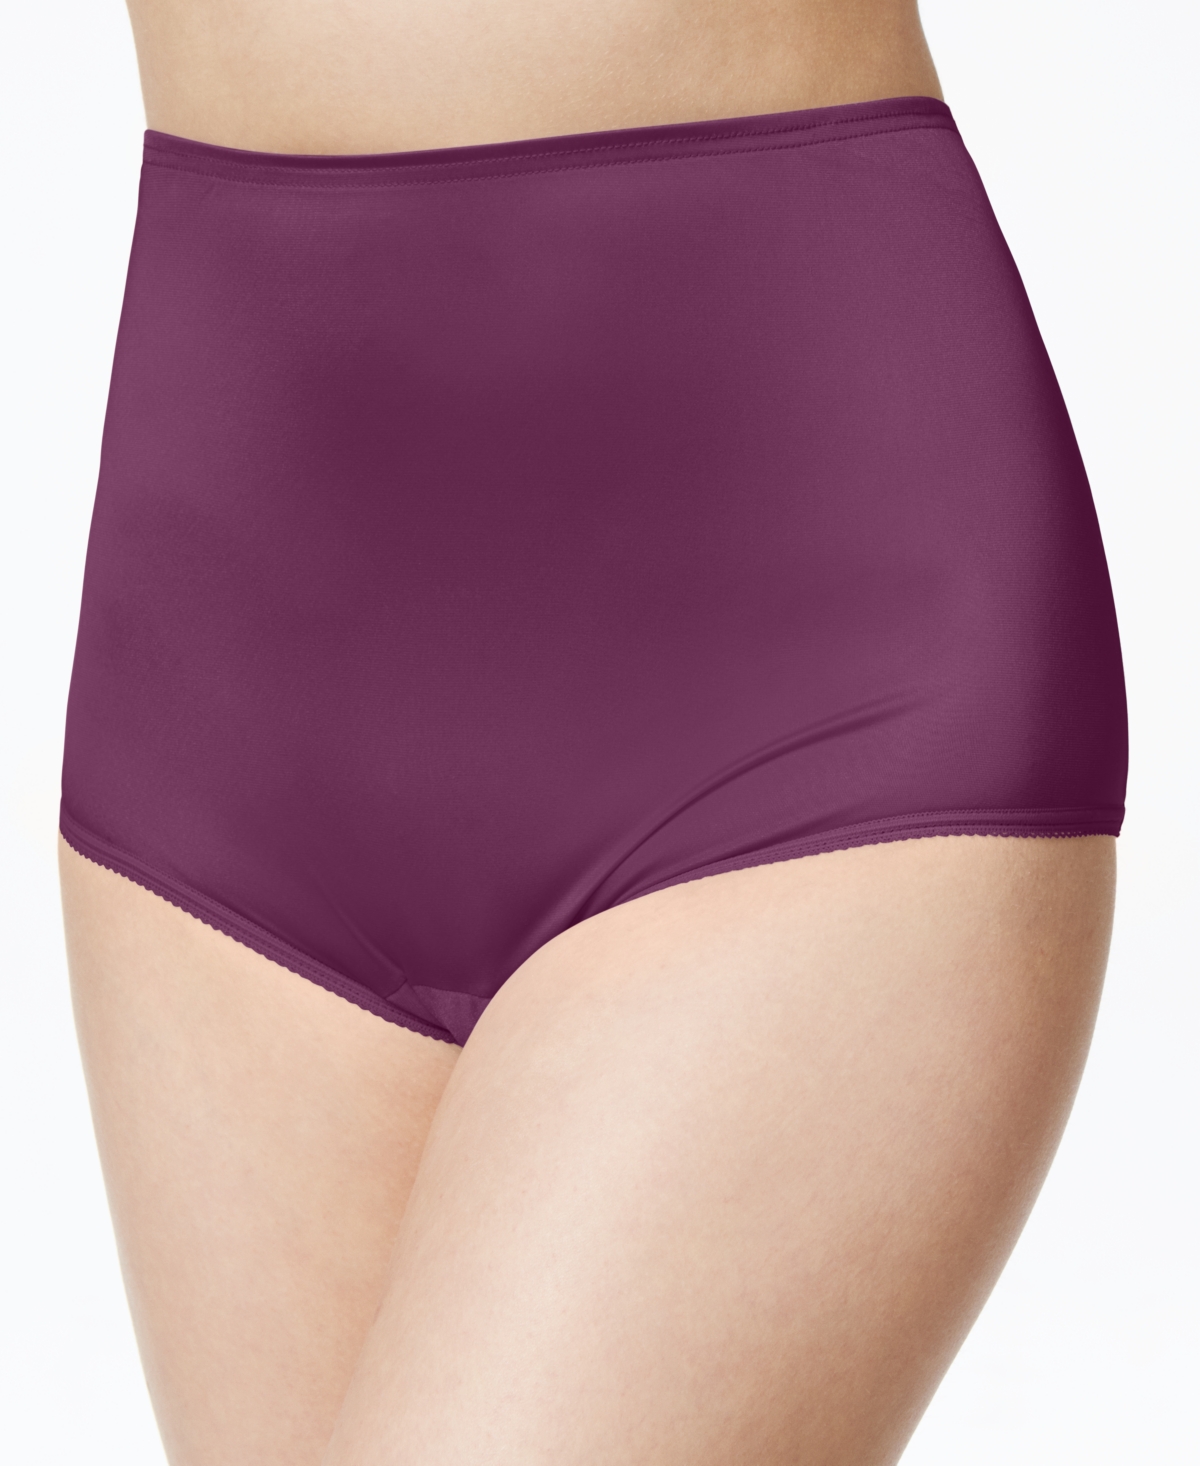 Perfectly Yours Ravissant Nylon Full Brief Underwear 15712, Extended Sizes - Sangria